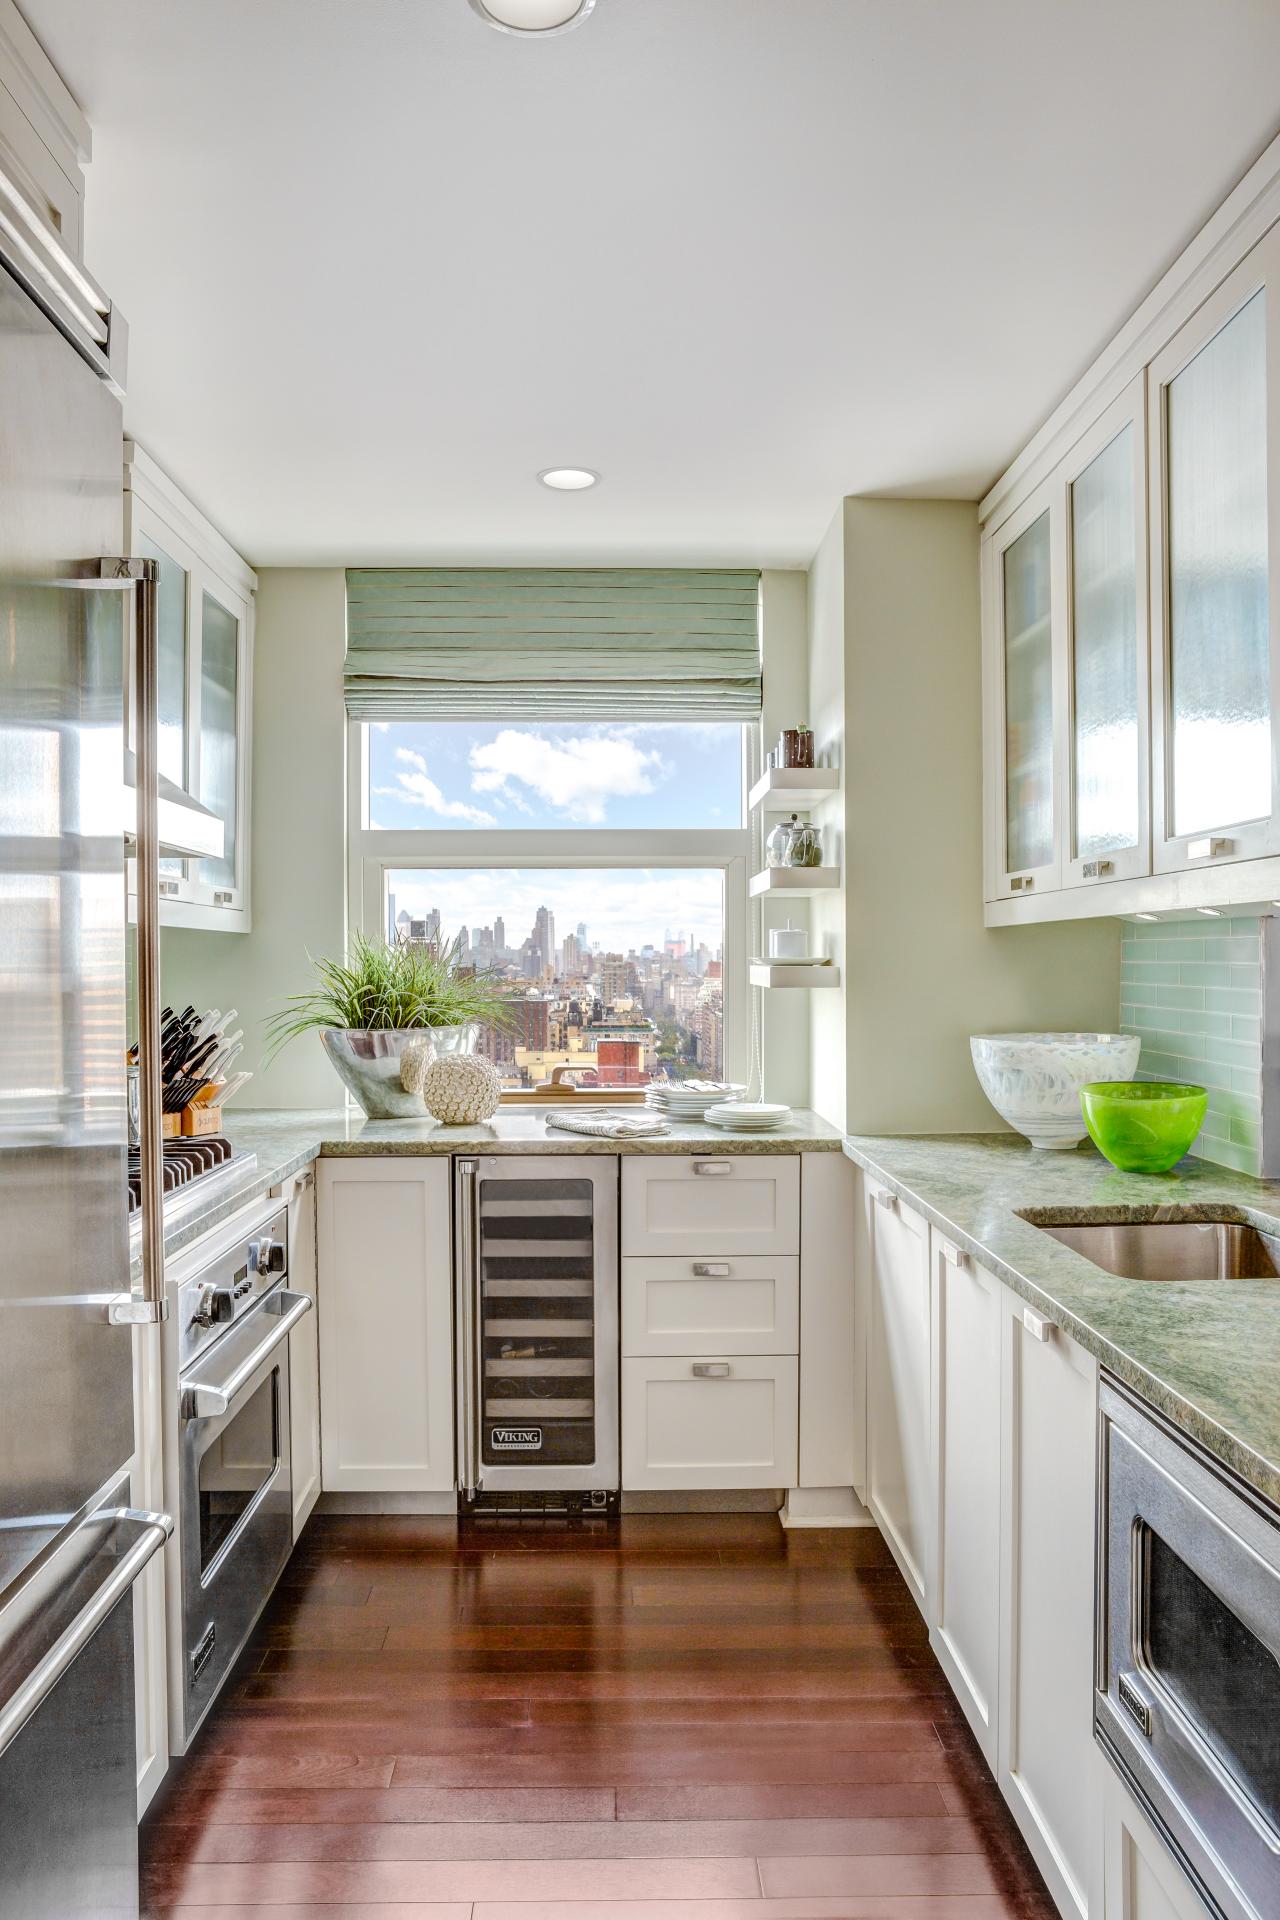 Design Tips For Your Small Kitchens